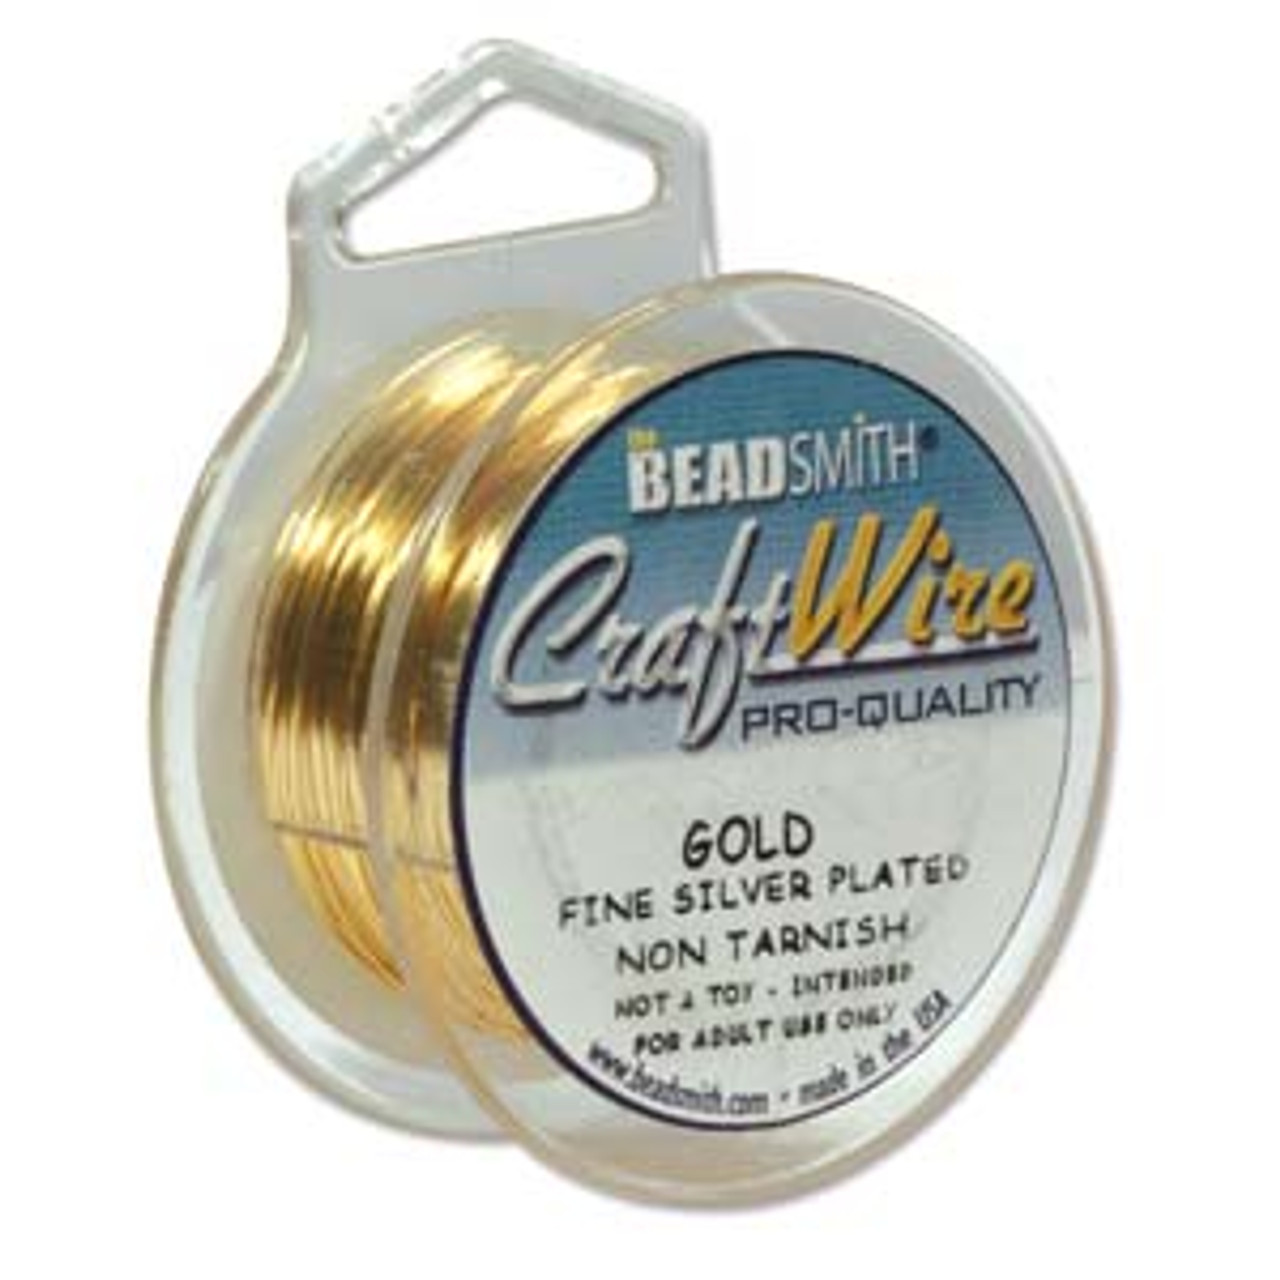 22 Gauge, Gold, ParaWire, 8 Yards - Beauty in the Bead